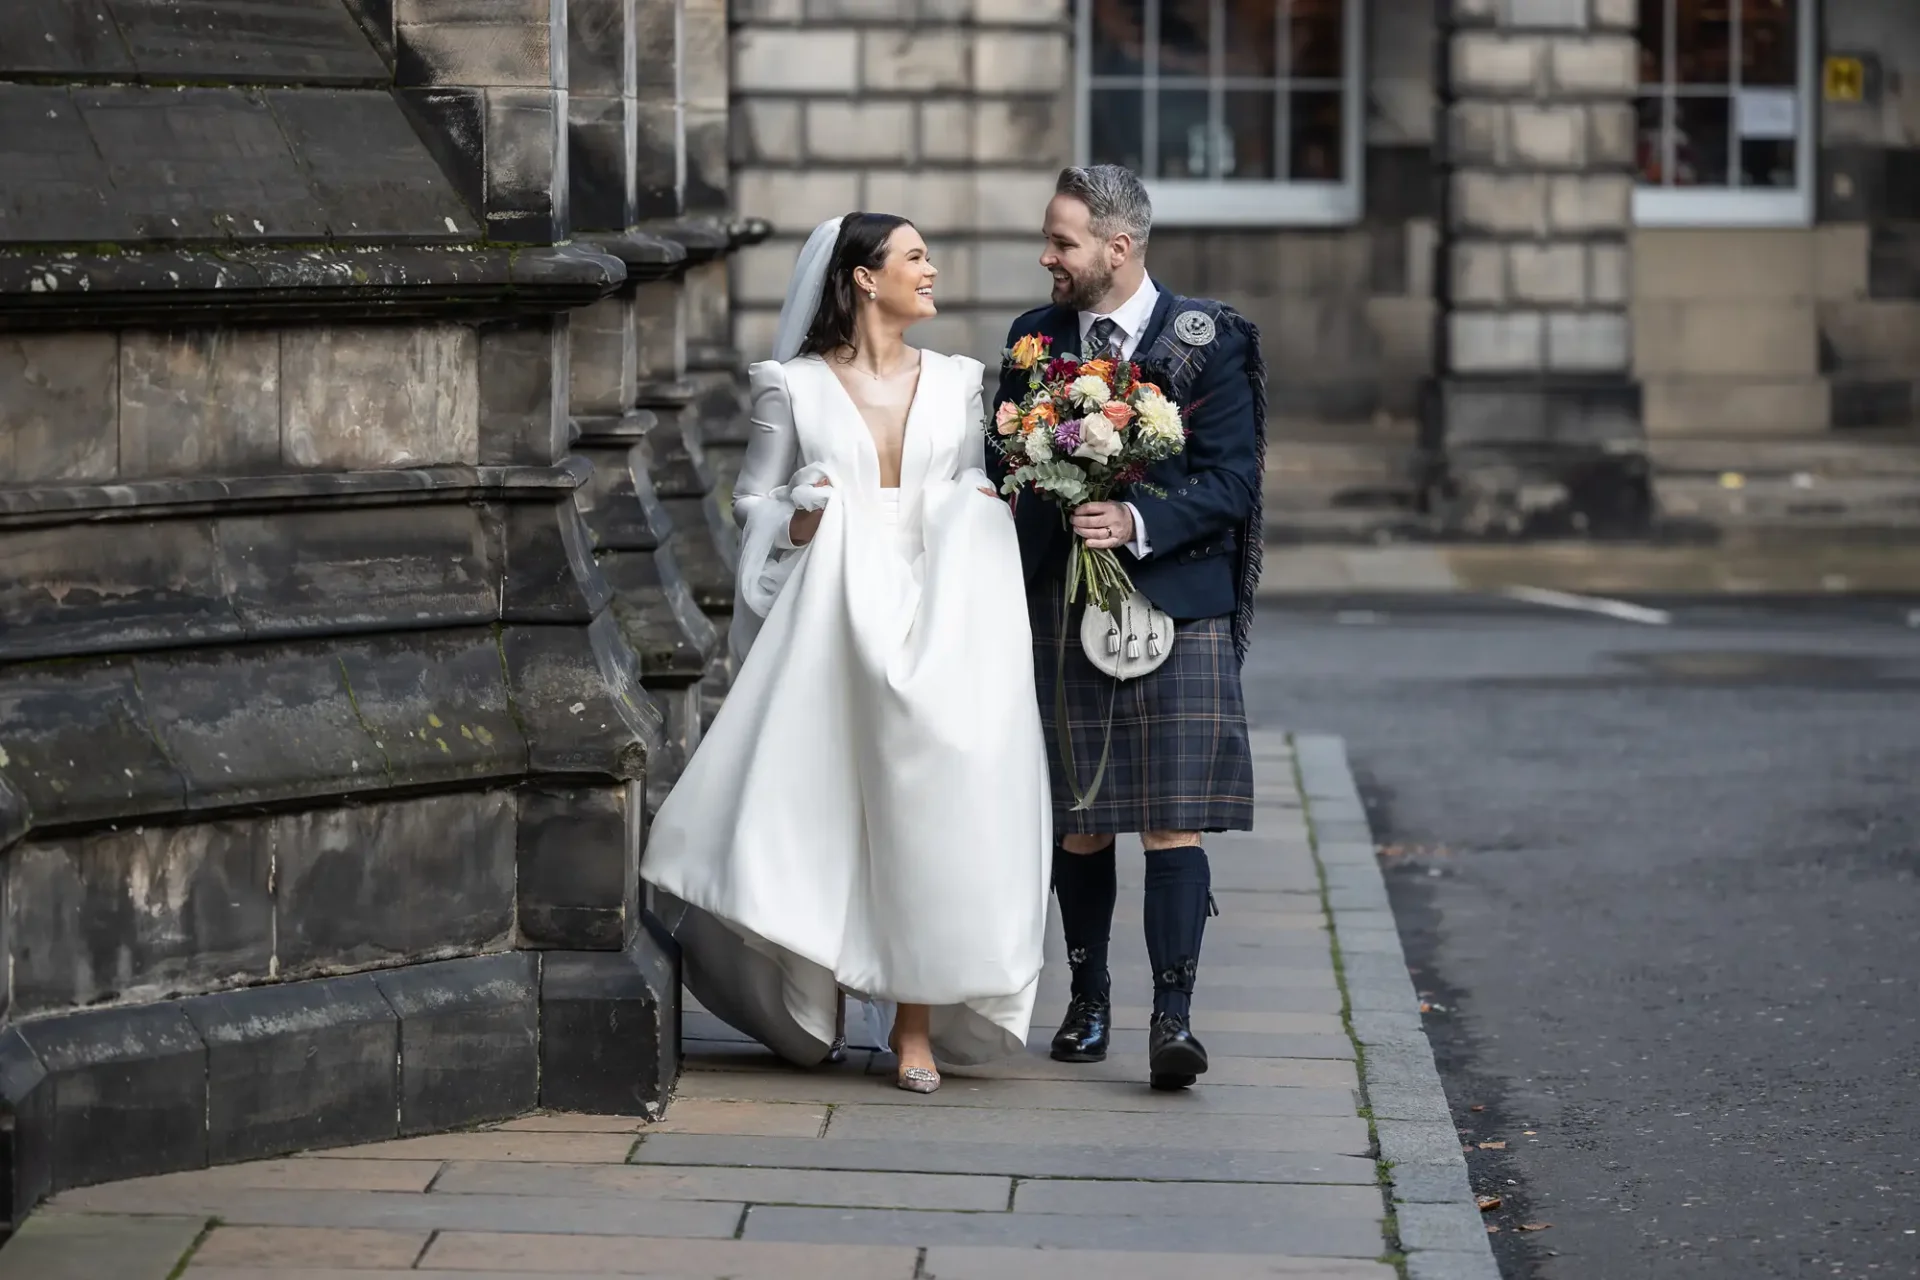 A bride in a white dress and a groom in a kilt, holding hands and walking along a city street, smiling at each other.